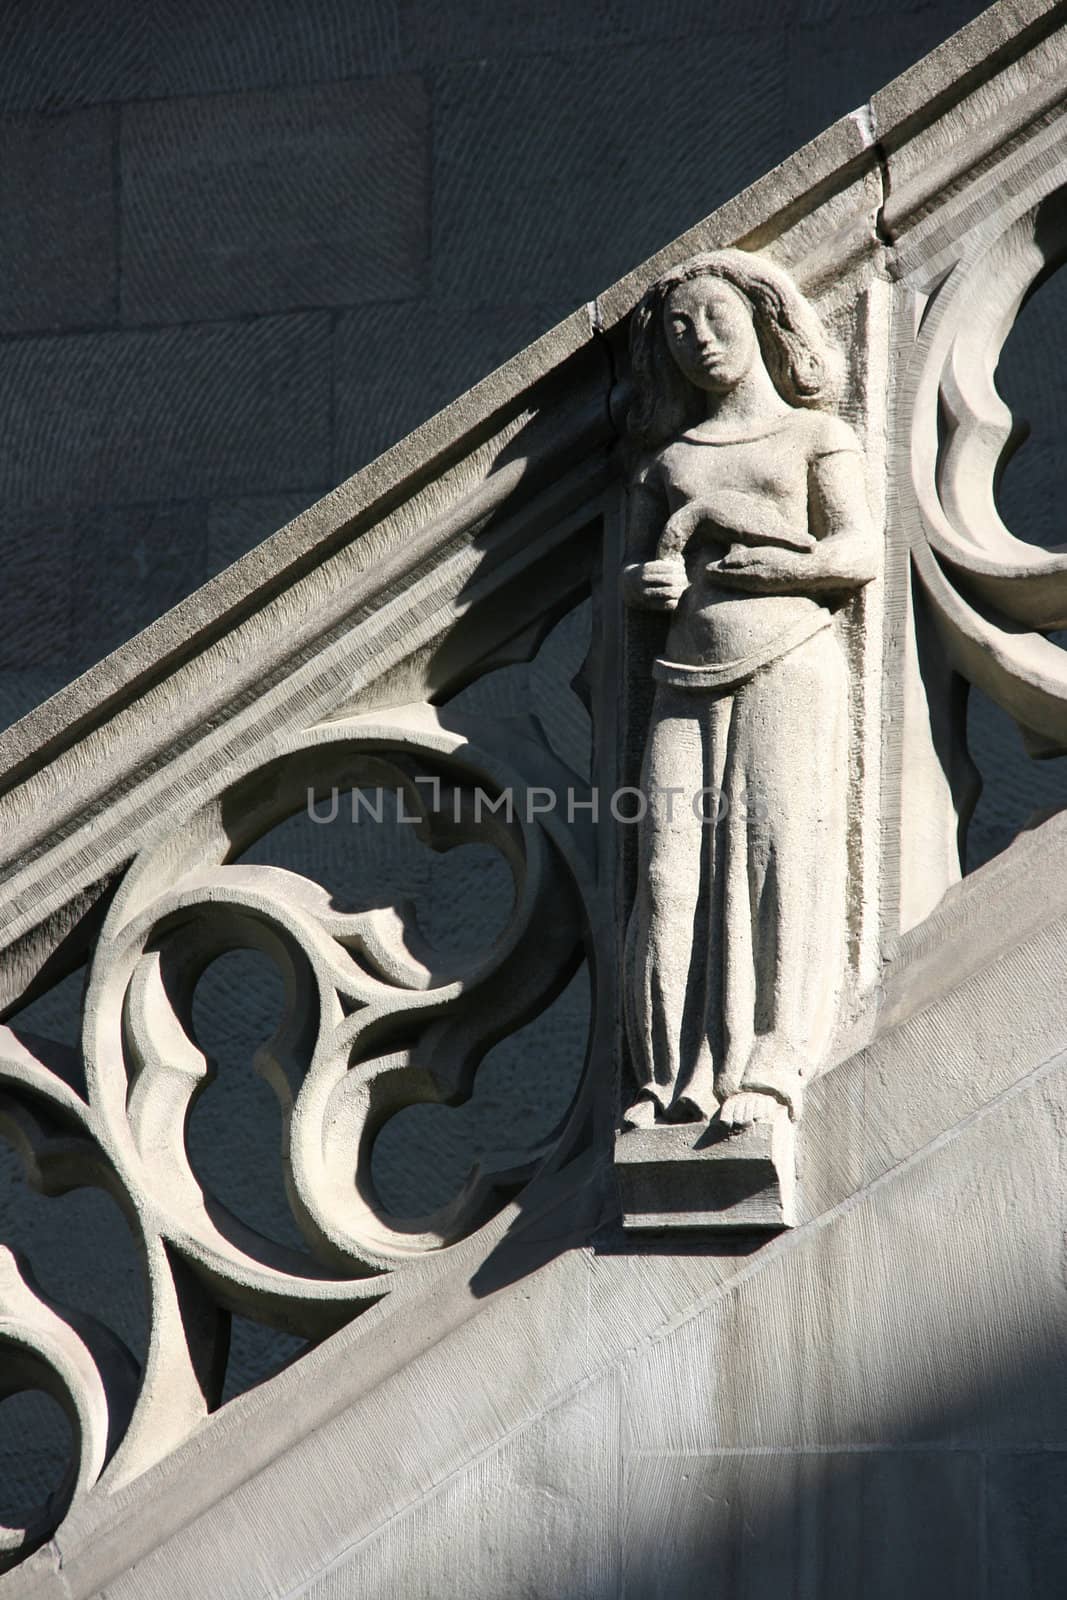 Detail of Berne city hall - sculpture depicting a woman